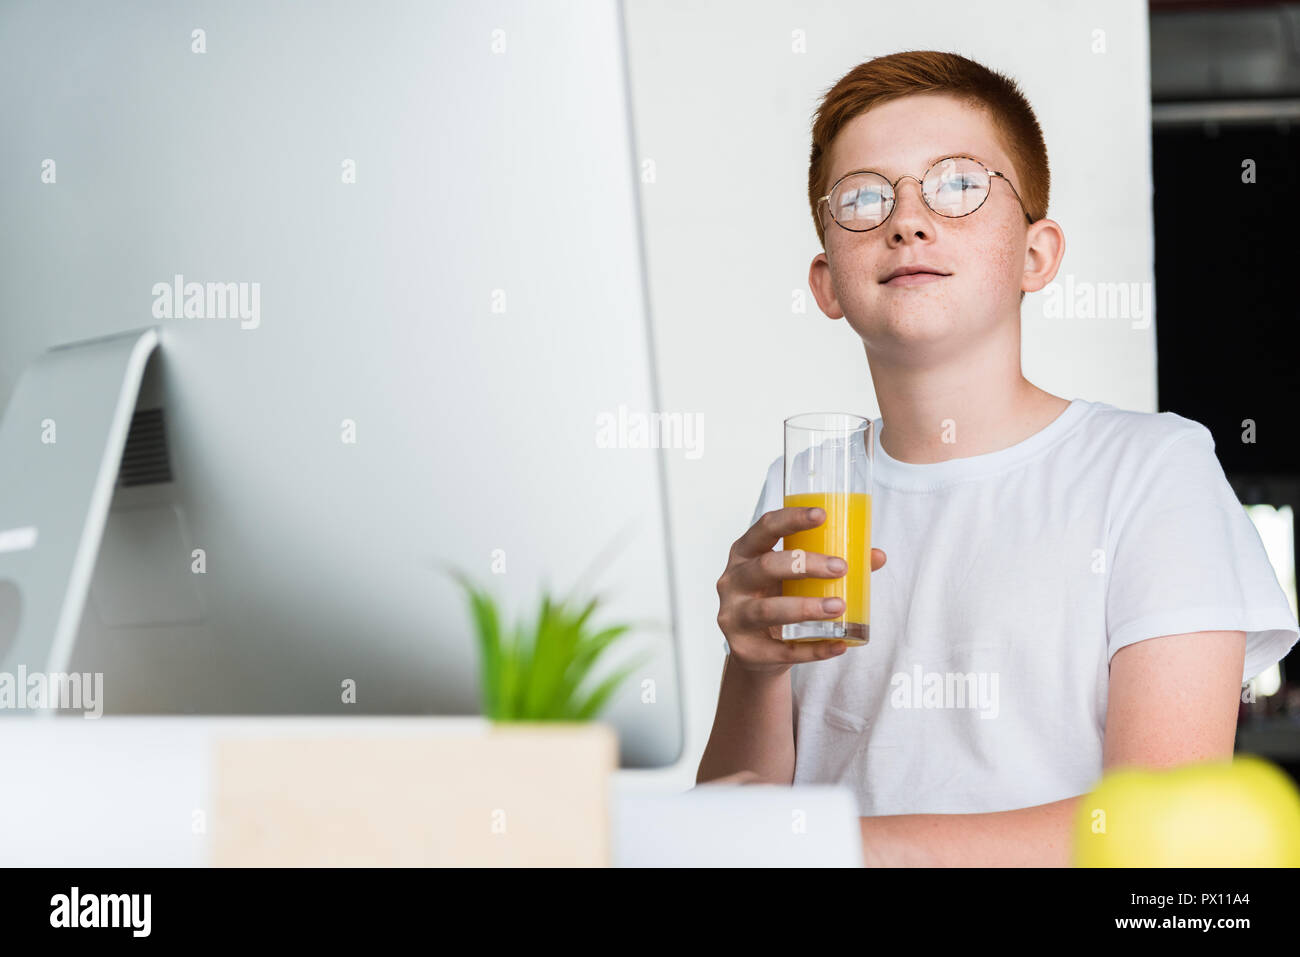 preteen ginger hair boy holding glass of juice at home Stock Photo